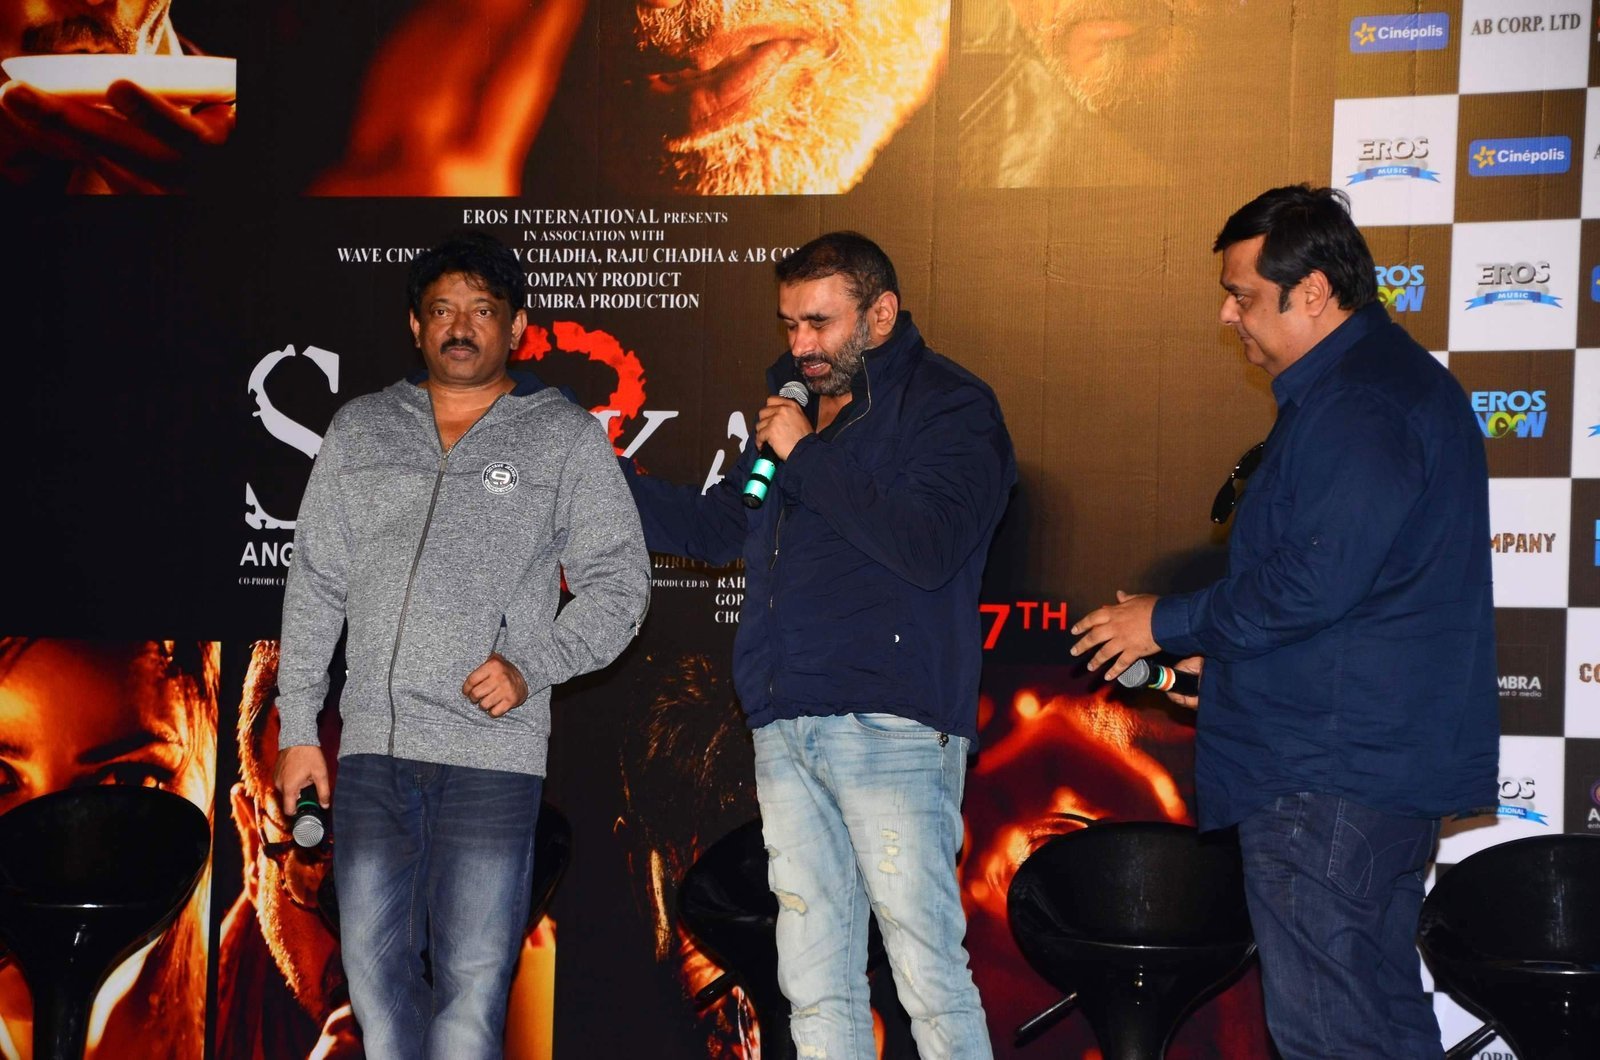 Trailer launch of film Sarkar 3 Images | Picture 1477755